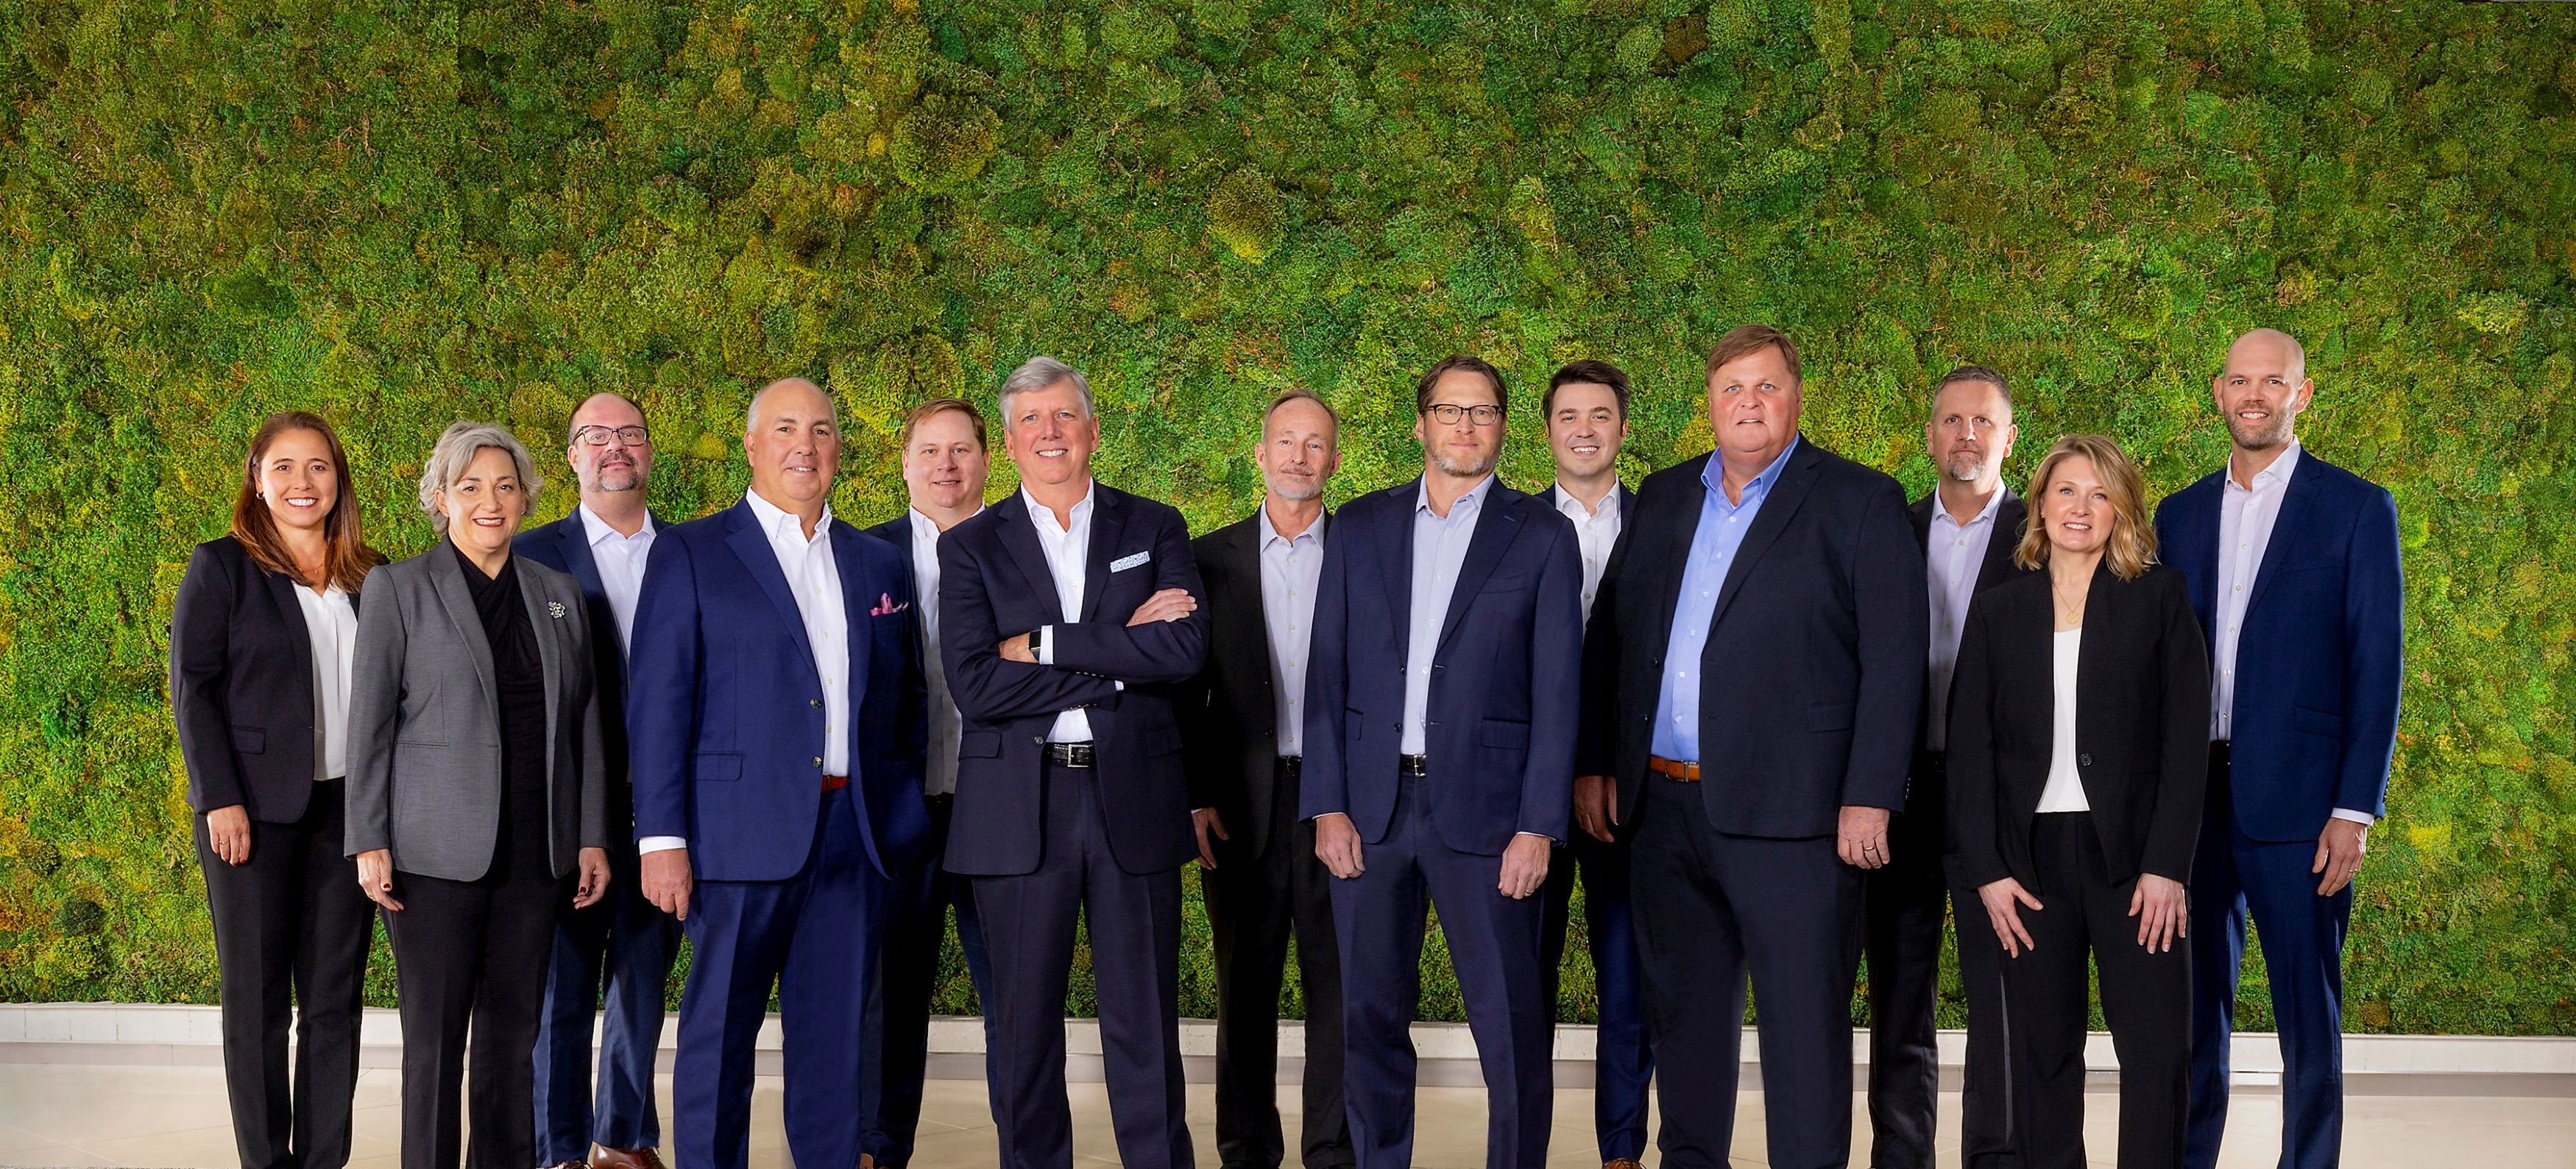 photo of JAG executives in front of a green wall